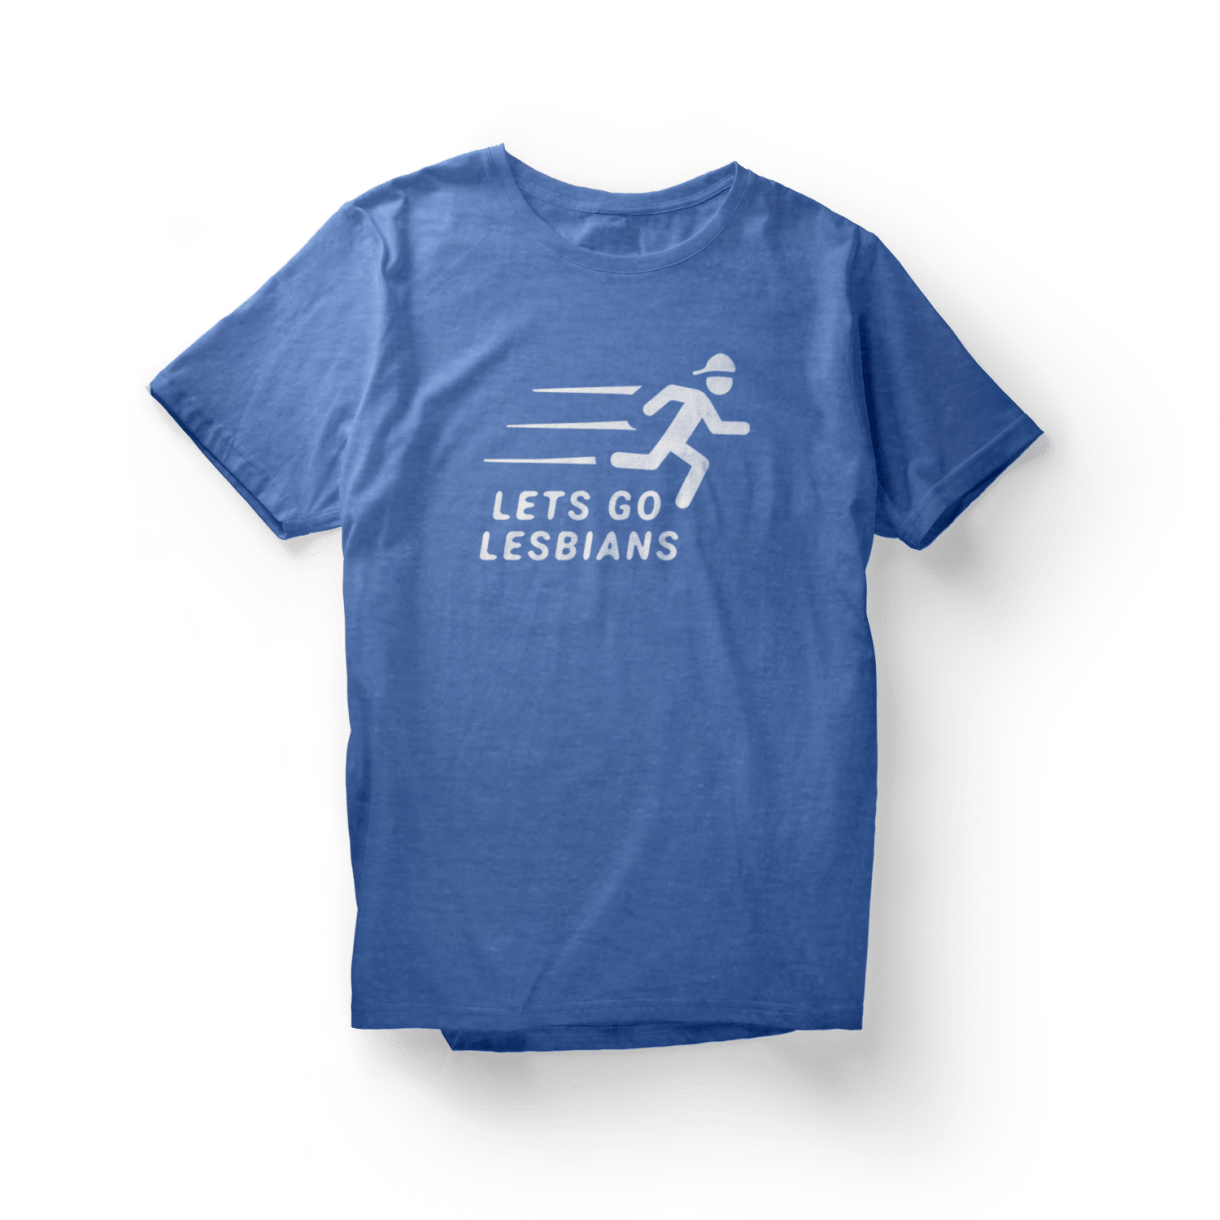 Blue shirt with a white "Let's Go Lesbians" graphic of a figure with a backwards baseball cap running.